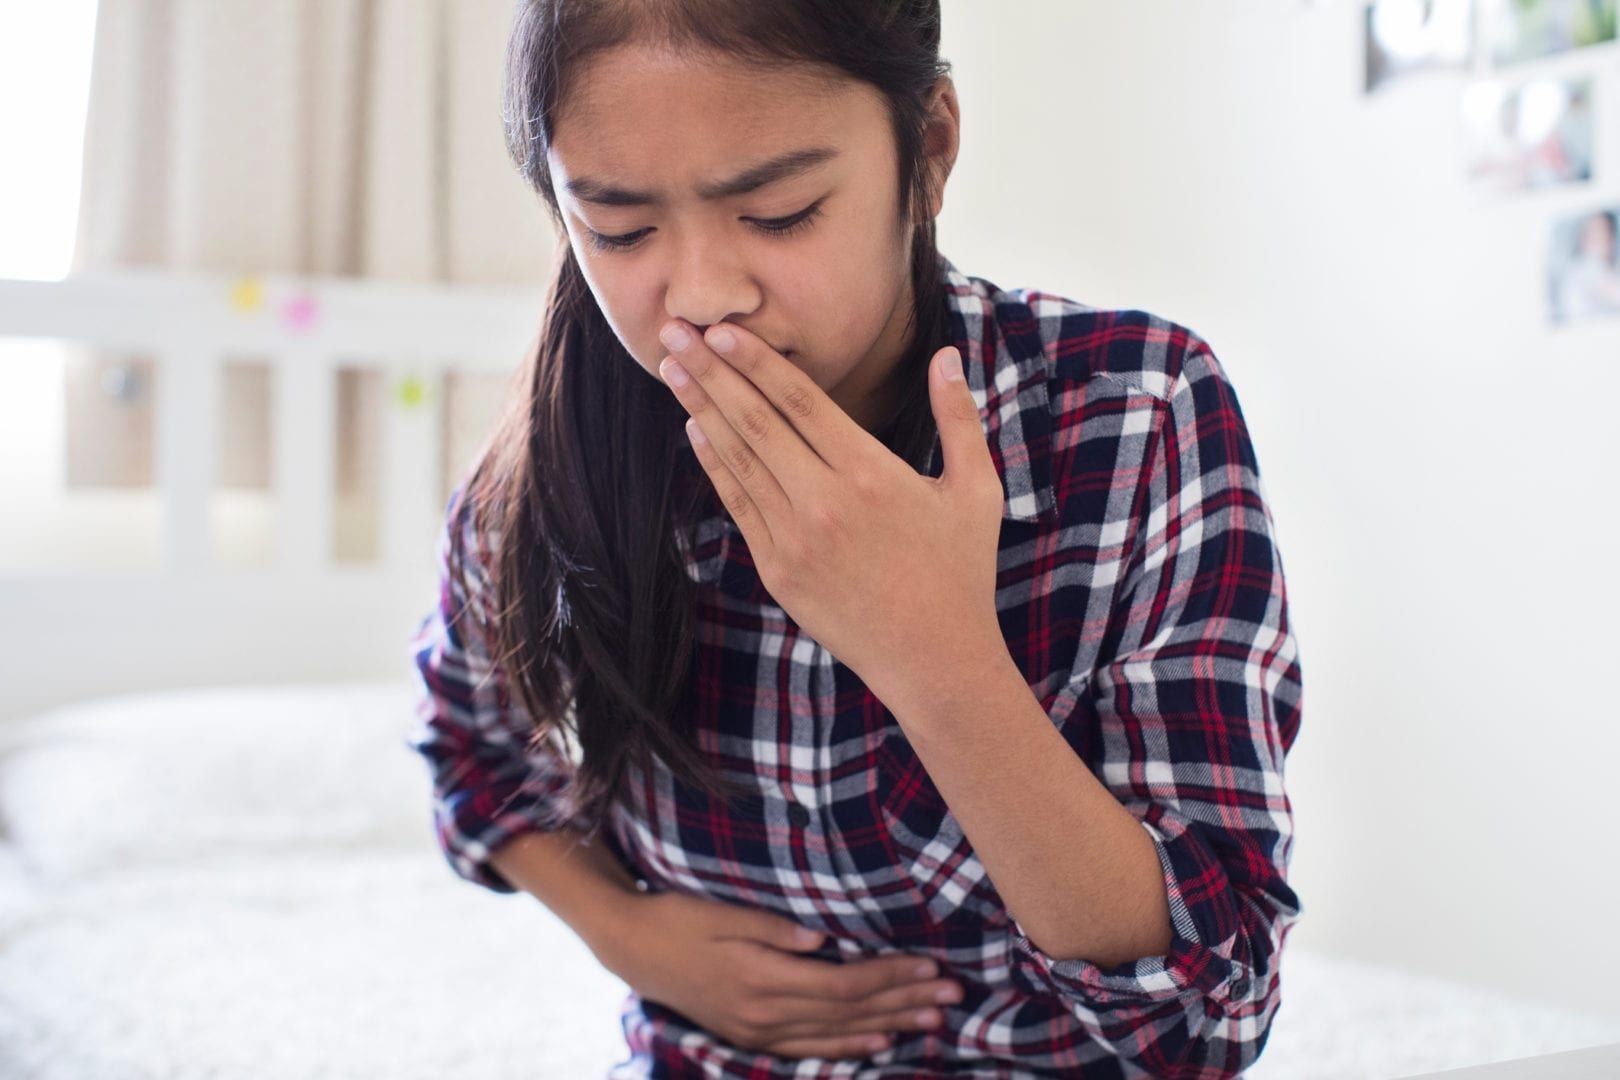 Stomach flu in kids: Symptoms, treatment and home remedies